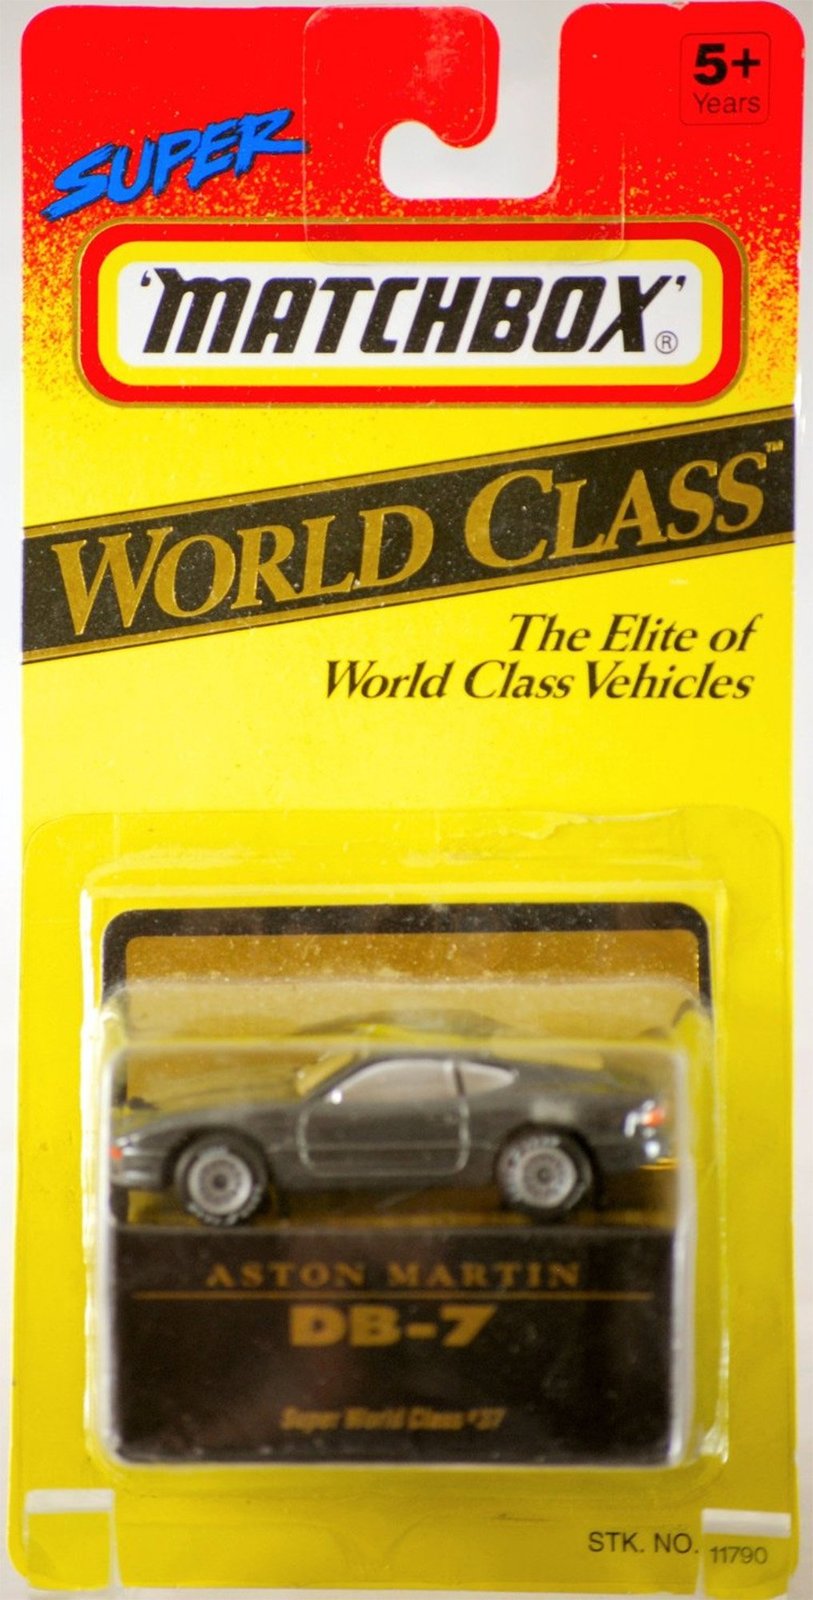 Primary image for 1993 - Tyco Toys Inc - Super Matchbox - World Class Series #37 - Aston Martin DB